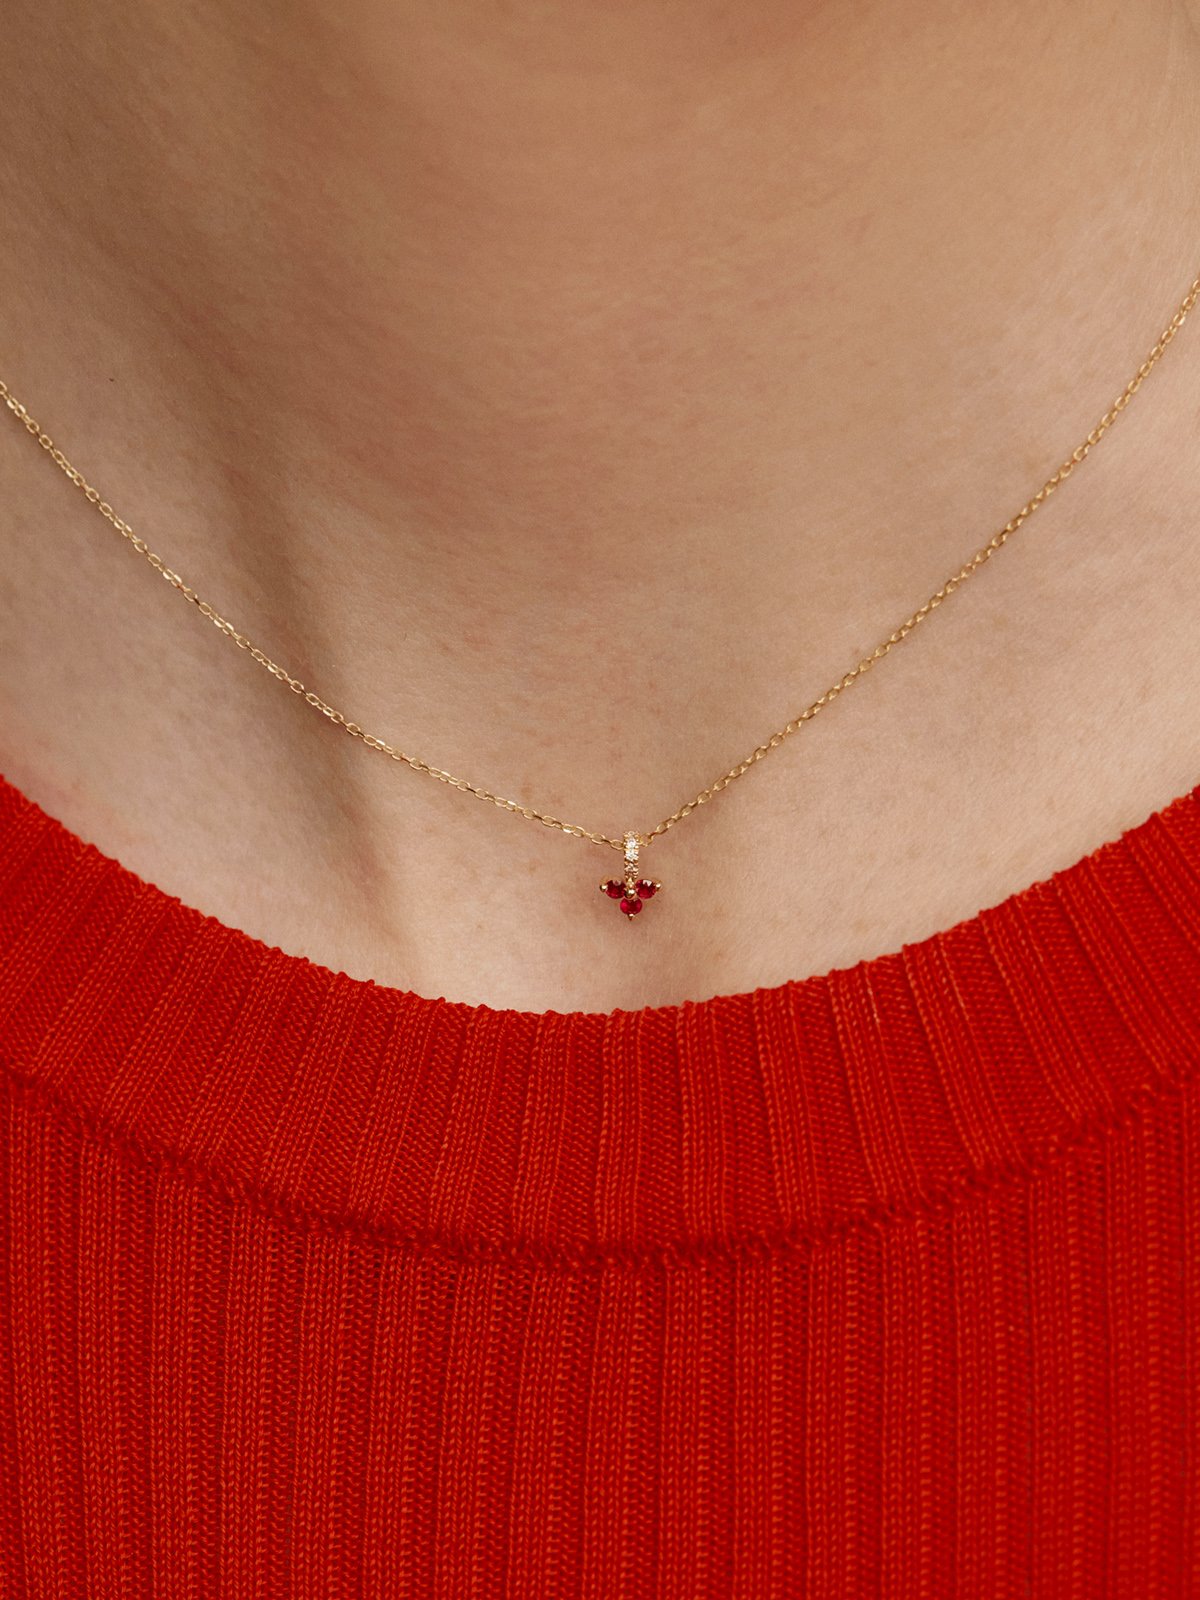 9K Yellow Gold Pendant with Red Ruby Clover and Diamonds